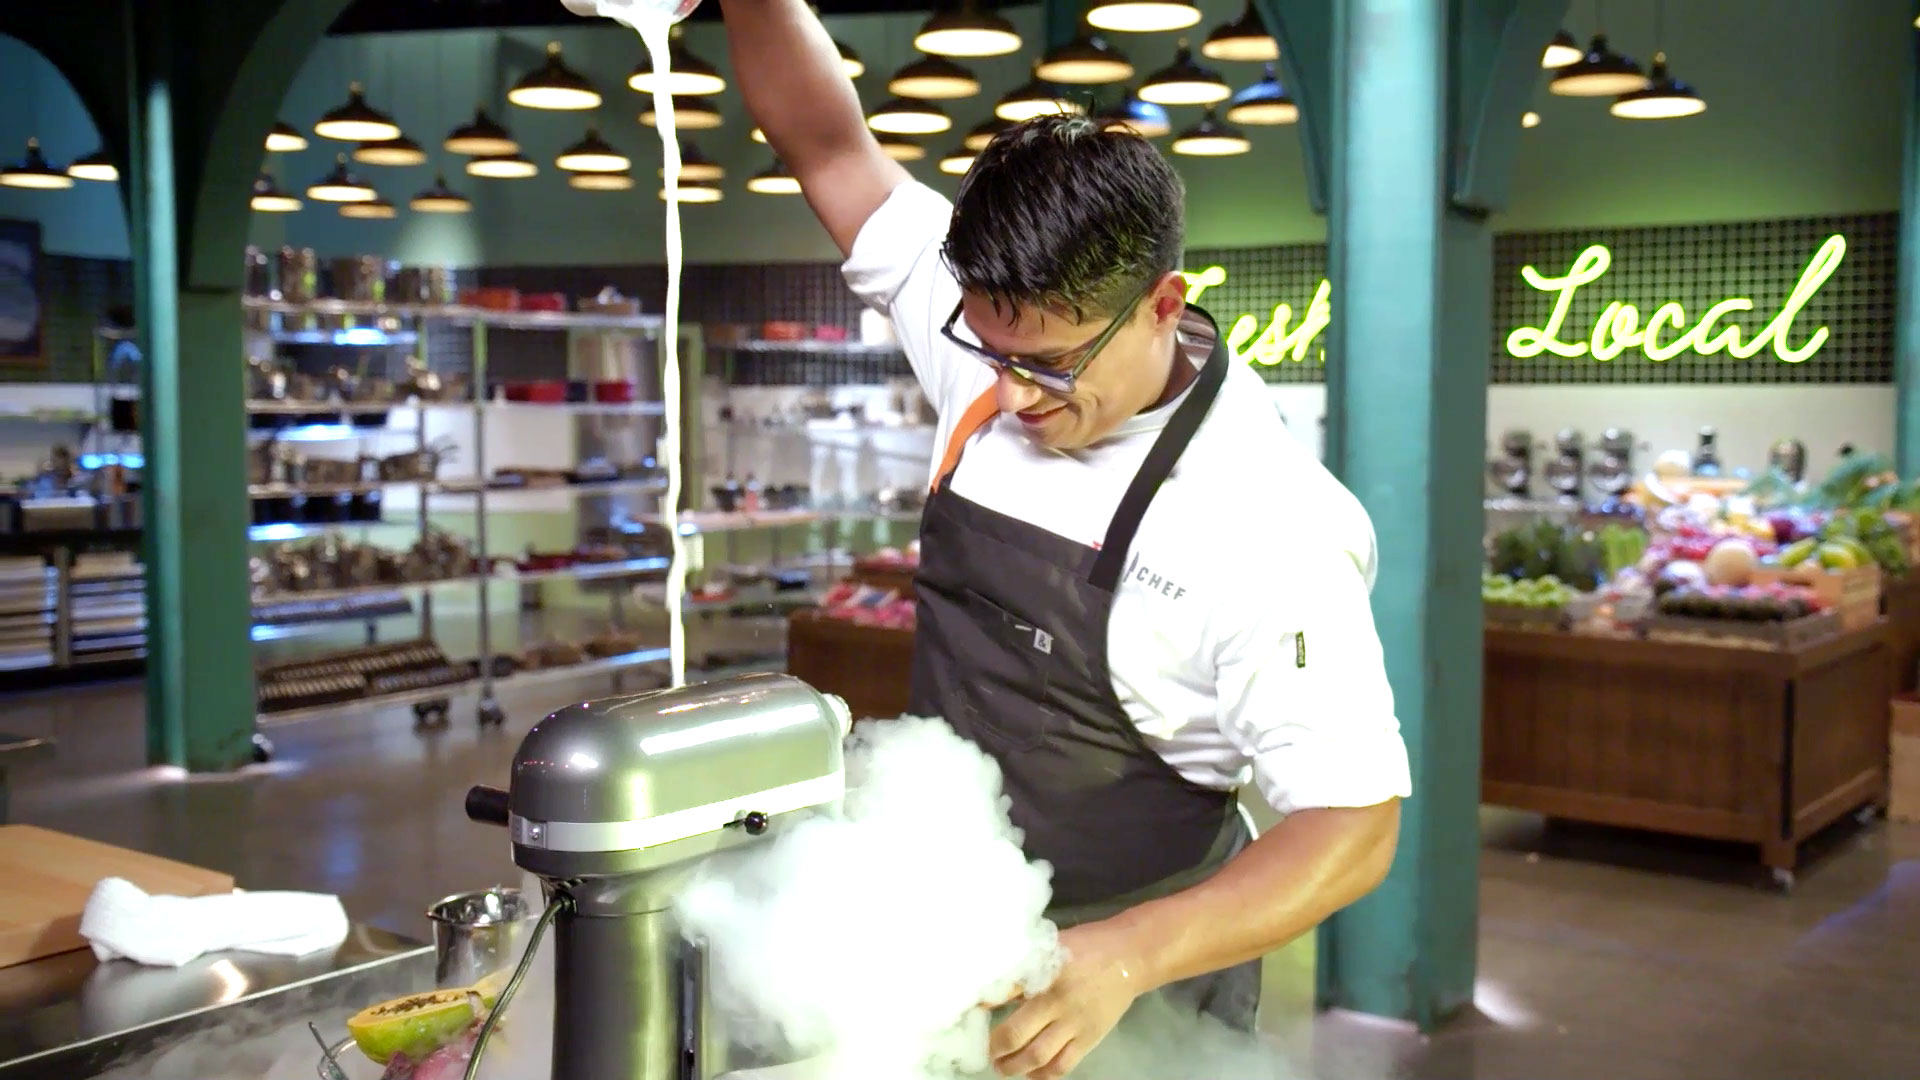 Watch Top Chef Is Back With an Epic New Season! Top Chef Season 18 Video